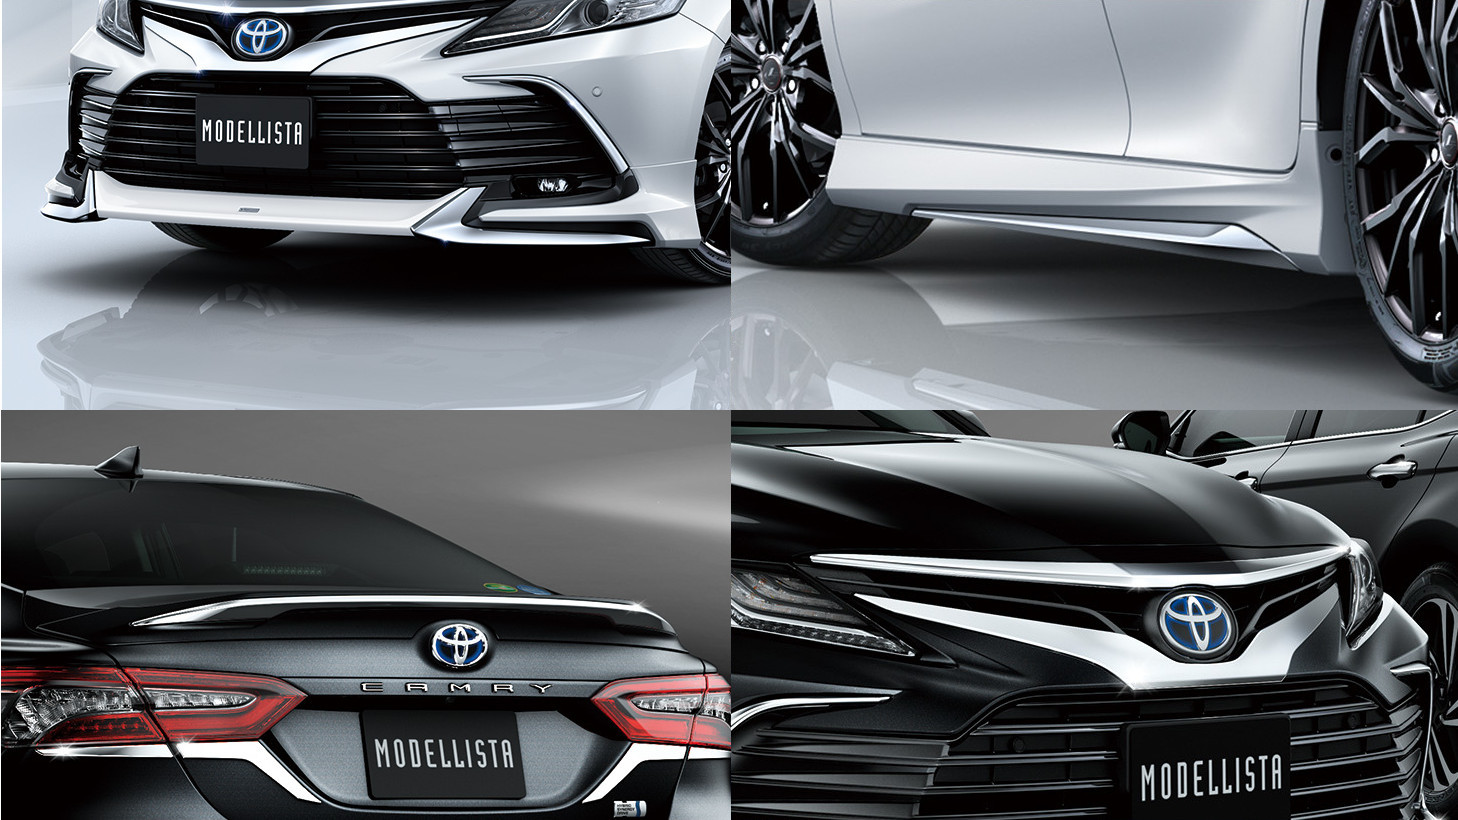 Details fo the Modellista Kit for the Camry